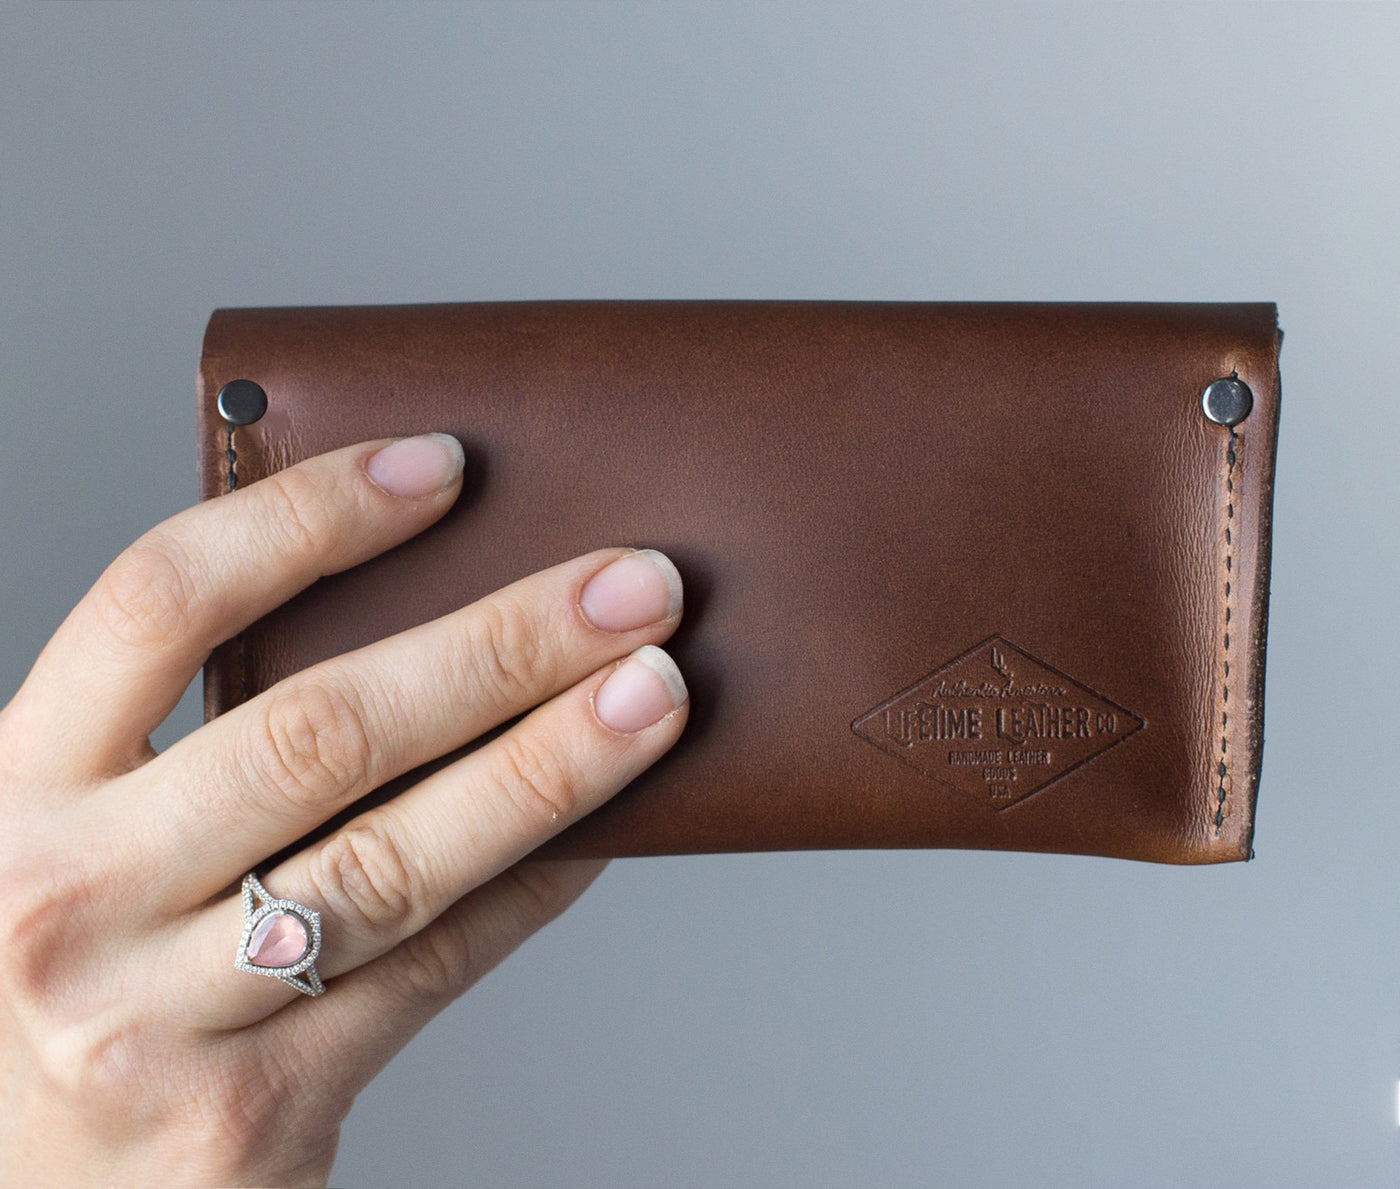 Eyeglasses Case by Lifetime Leather Co